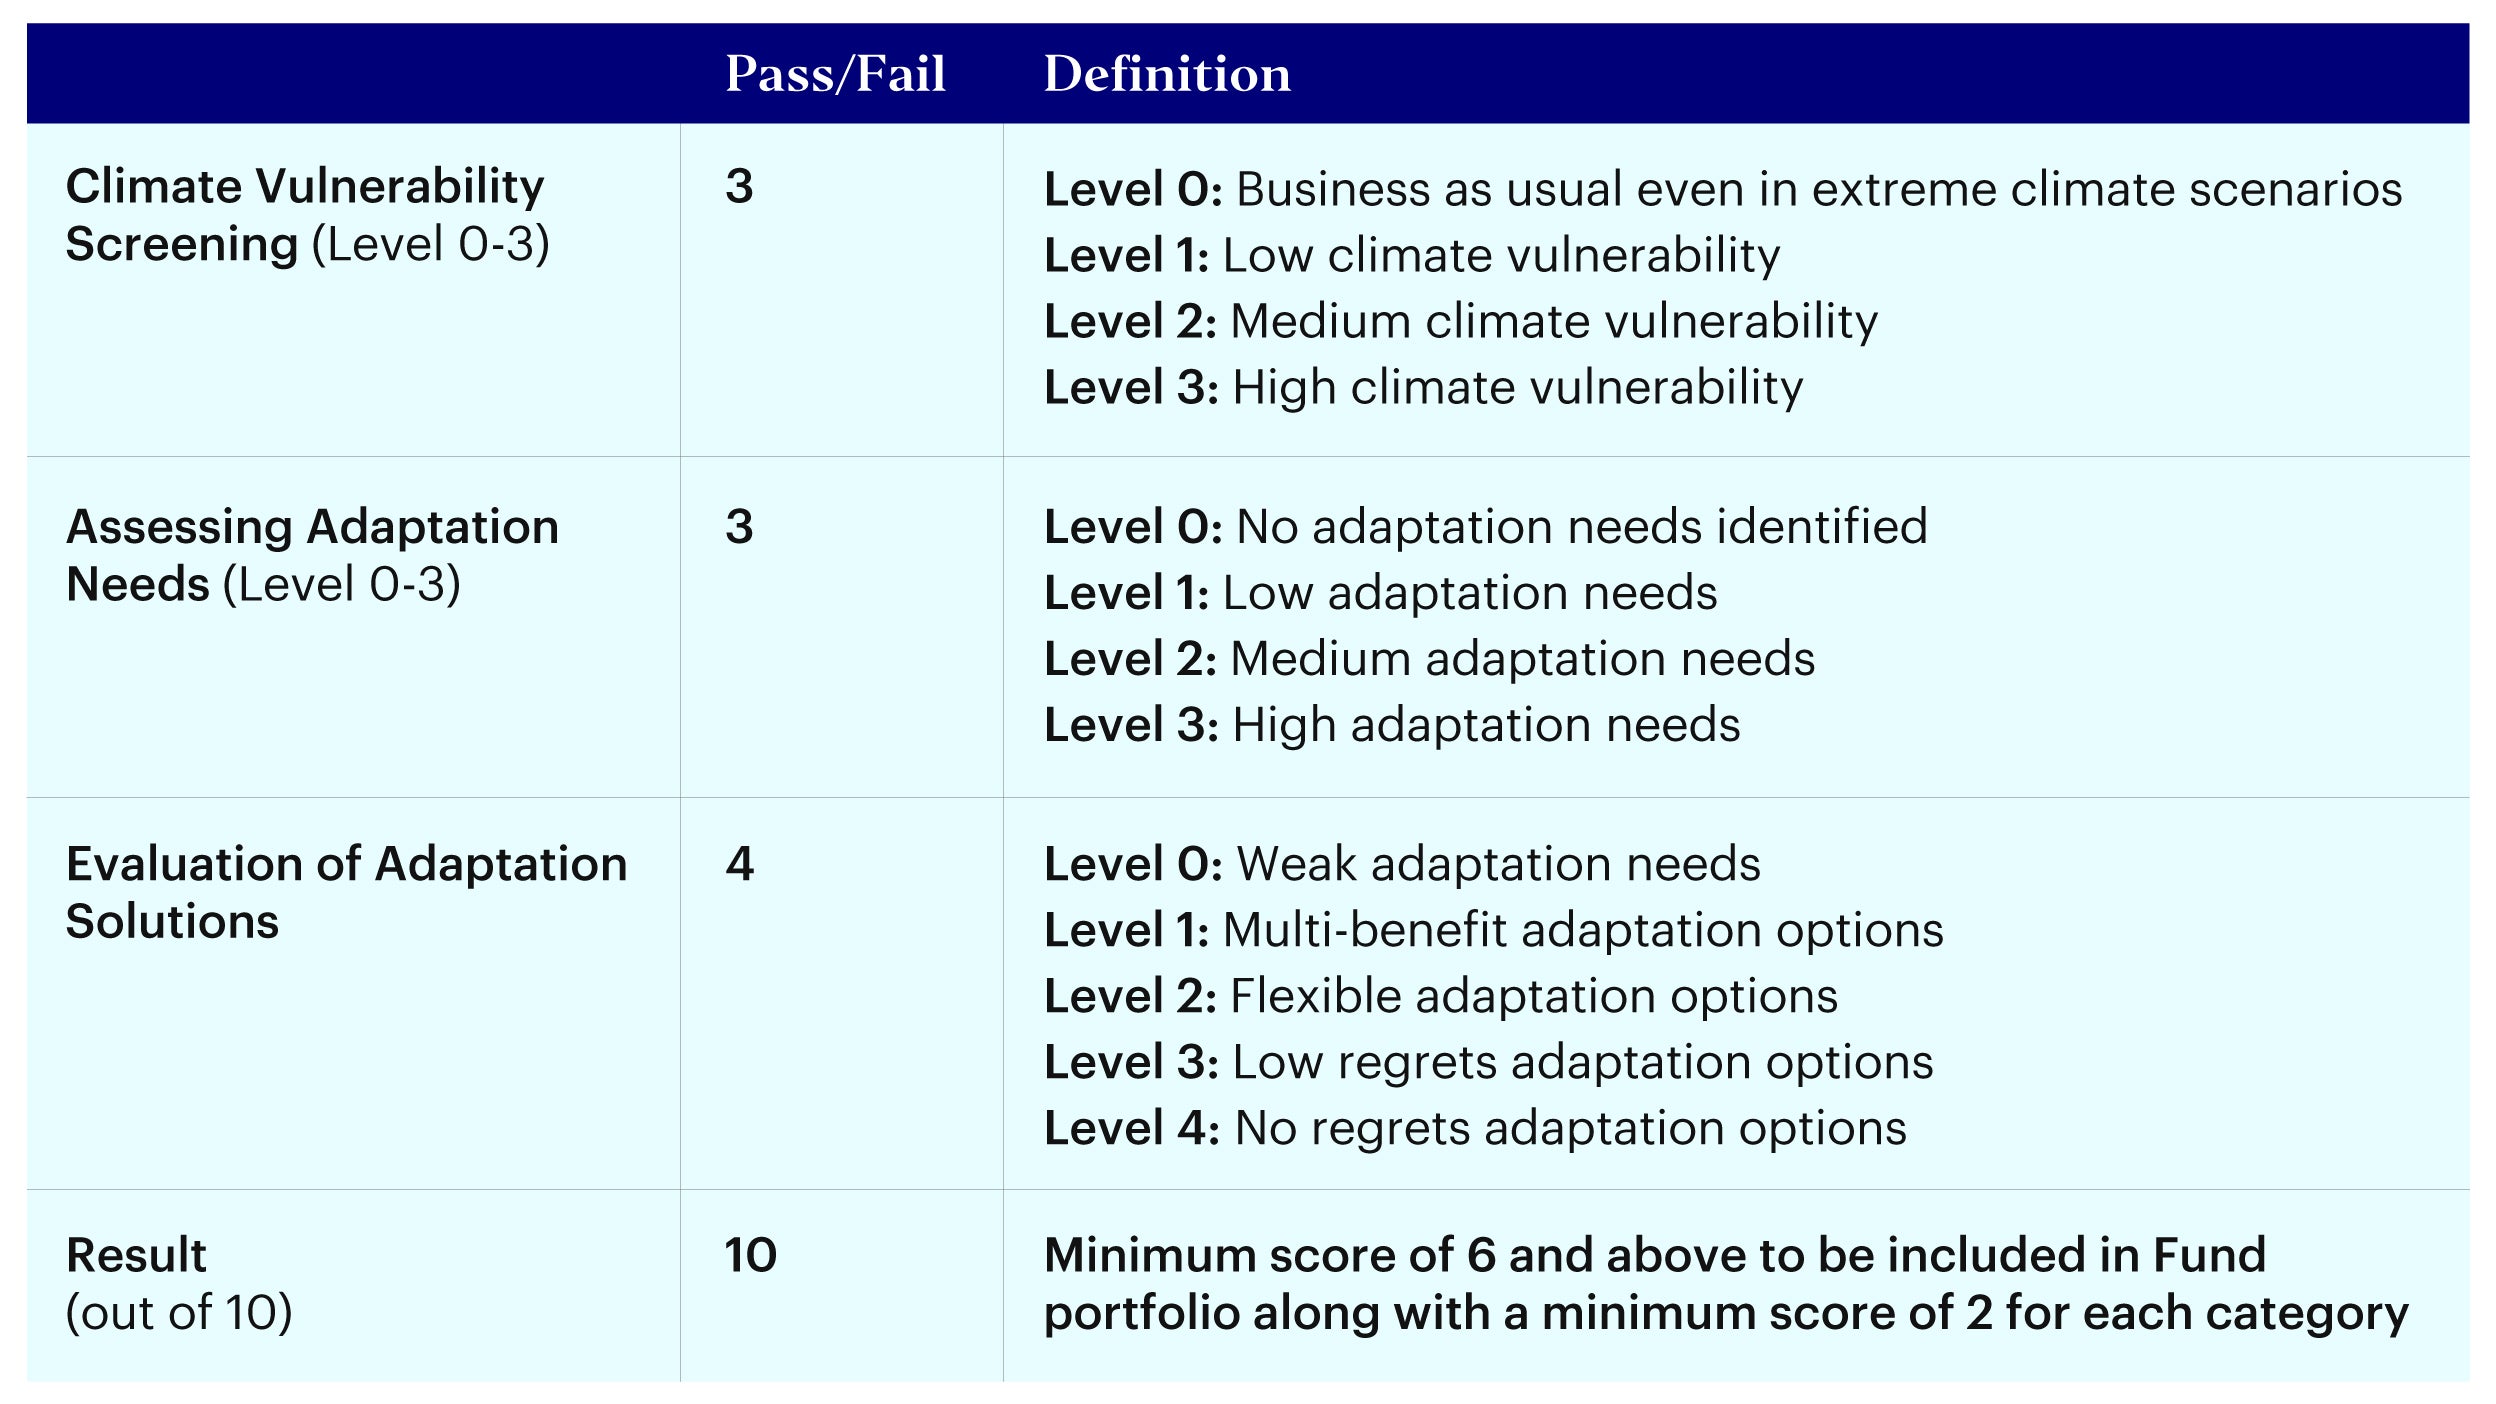 Figure 4 – Adaptation impact evaluation: Prioritize projects with significant climate vulnerability, adaptation needs and demonstrable adaptation solutions